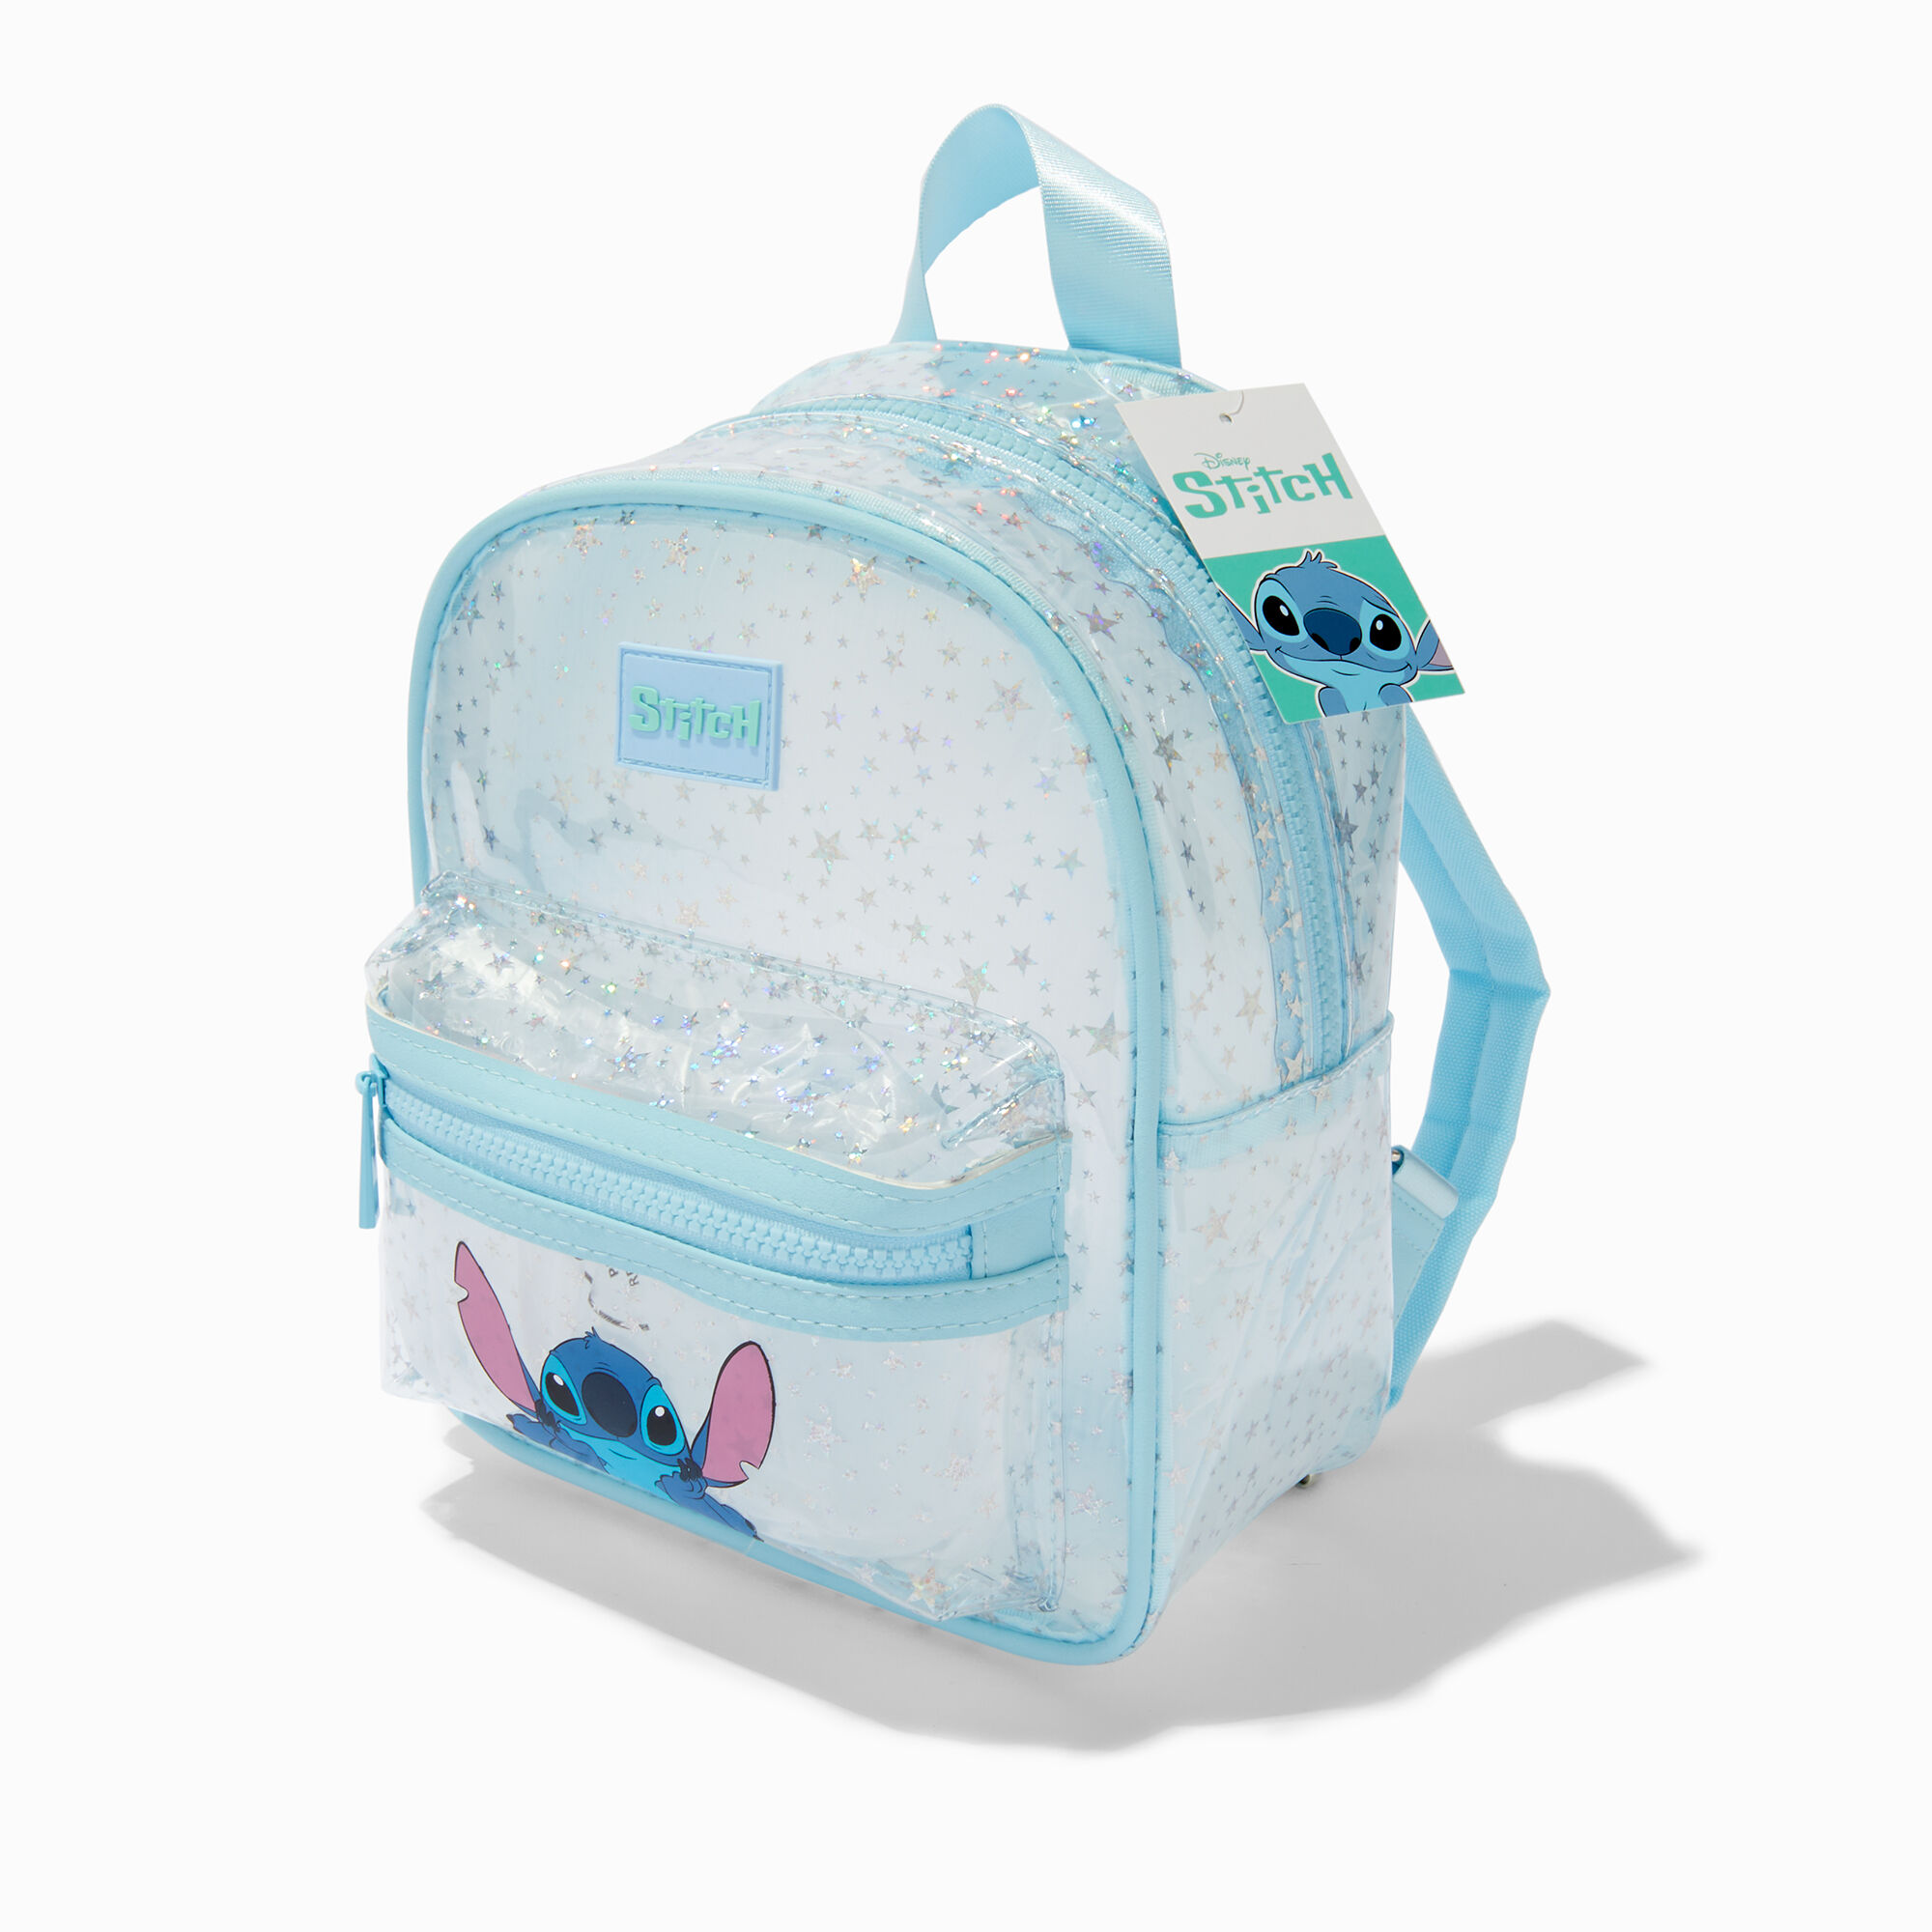 View Claires Disney Stitch Clear Glitter Backpack information